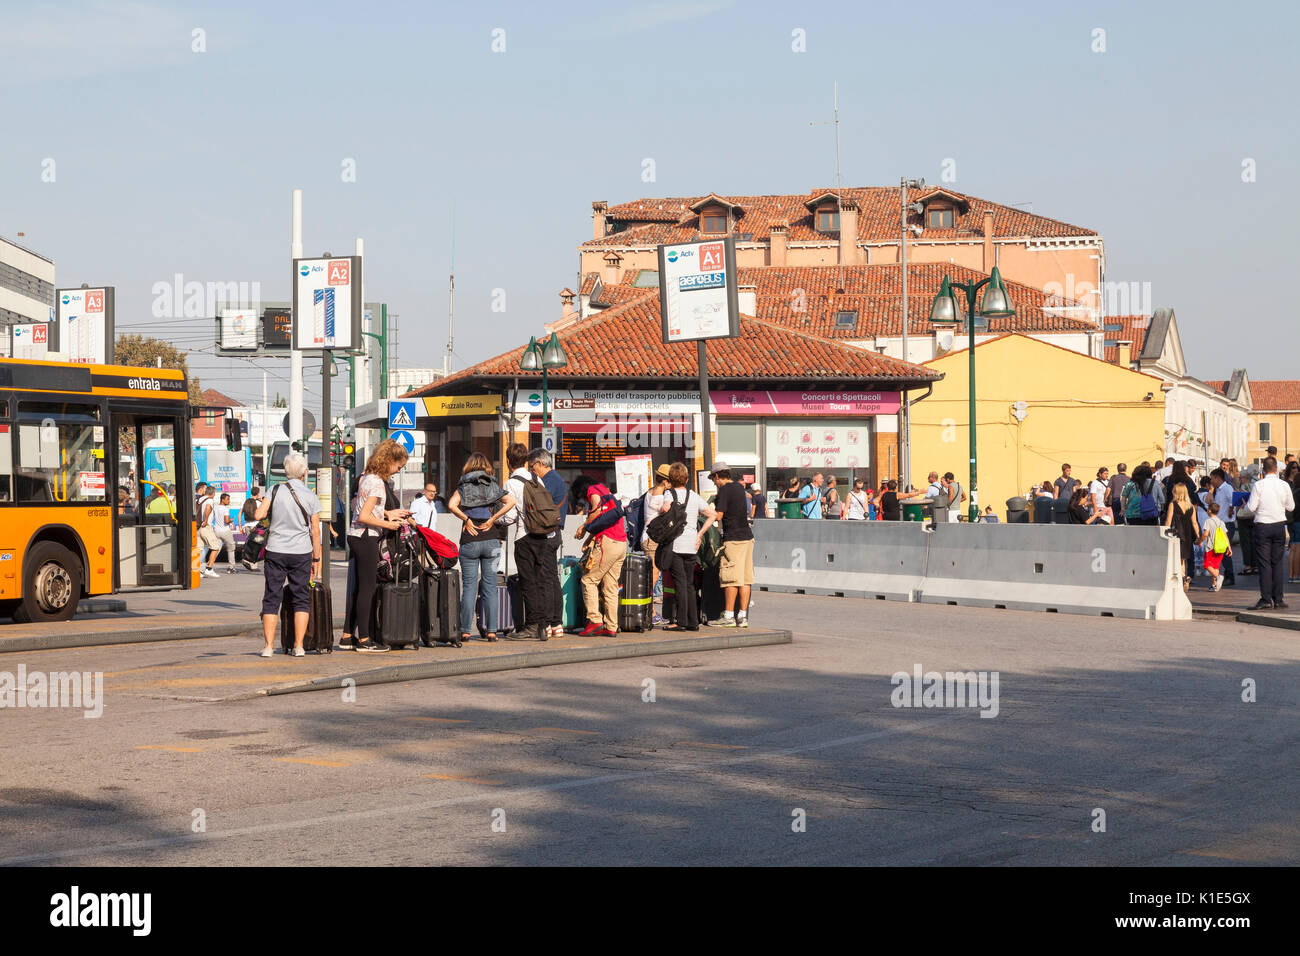 Venice, Italy. 26th Aug, 2017. Anti-terror preparations for the 2017 Venice Film Festival due to start on the 30 August. Overnight the first of the concrete barriers have been installed in the Piazzale Roma to protect pedestrians and the tram lines from vehicular terror attacks. Group of tourists with suitcases waiting to board a bus. Credit: Mary Clarke/Alamy Live News Stock Photo